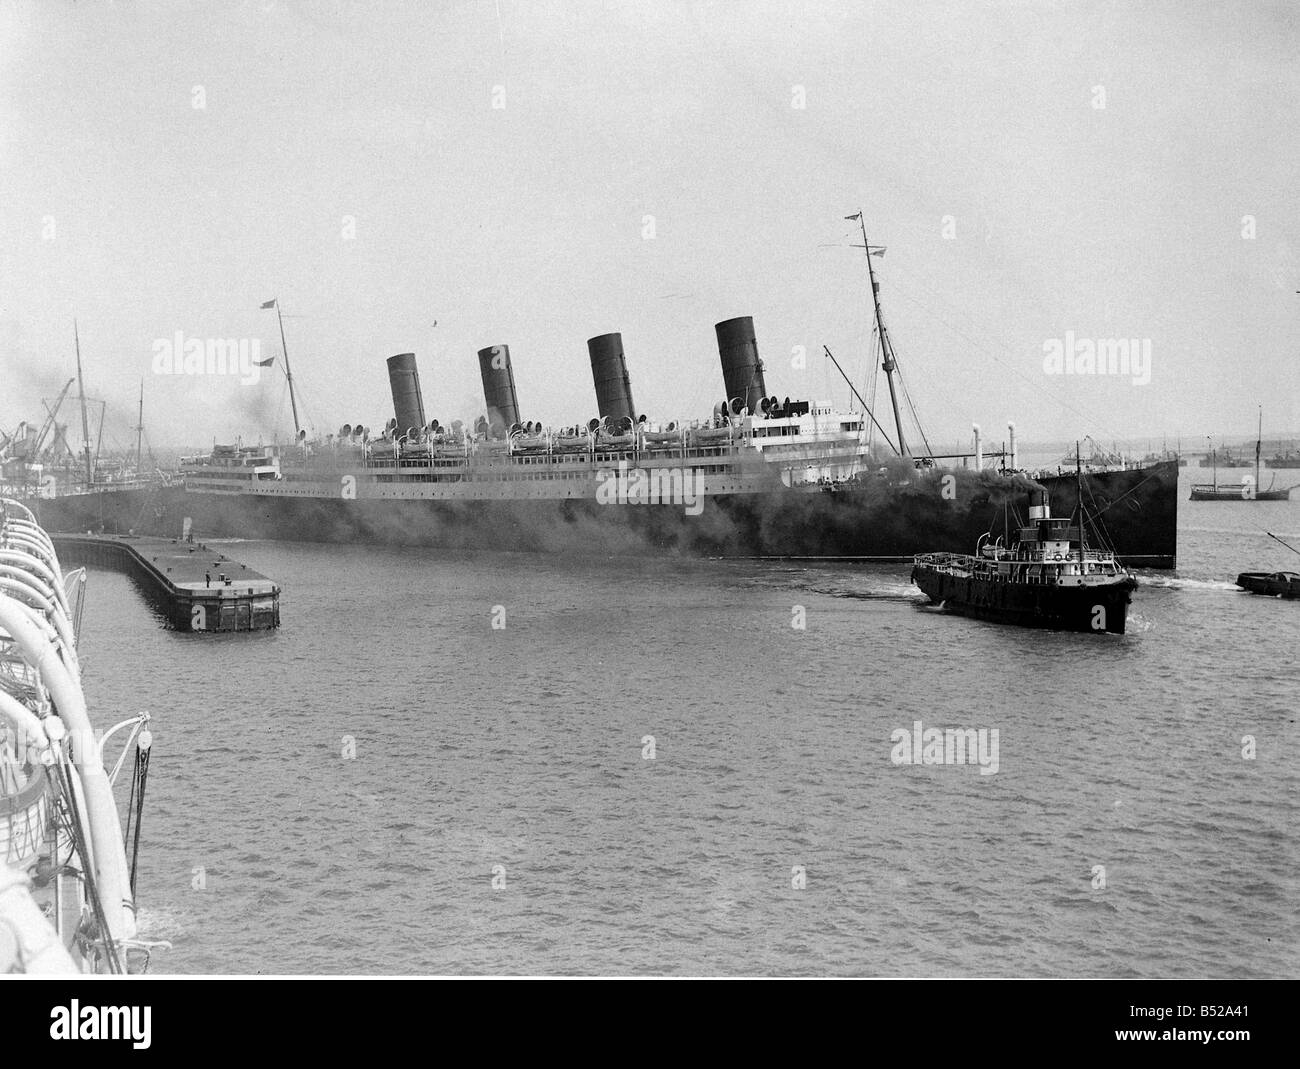 RMS Aquitania seen here leaving Southampton with a crew of volunteer stewards The Aquitania was built by John Brown Co Glasgow in 1913 for the Cunard Steamship Co She was a 45 647 gross ton ship overall length 901 5ft x beam 97ft 274 77m x 29 56m four funnels two masts four screws and a speed of 23 knots She carried 597 1st 614 2nd and 2 052 3rd class passengers Launched on 21st April 1913 she started her maiden voyage between Liverpool and New York on 30th May 1914 Her third and last voyage before the Great War started on 11th July 1914 and she was then fitted out as an Armed Merchant Stock Photo